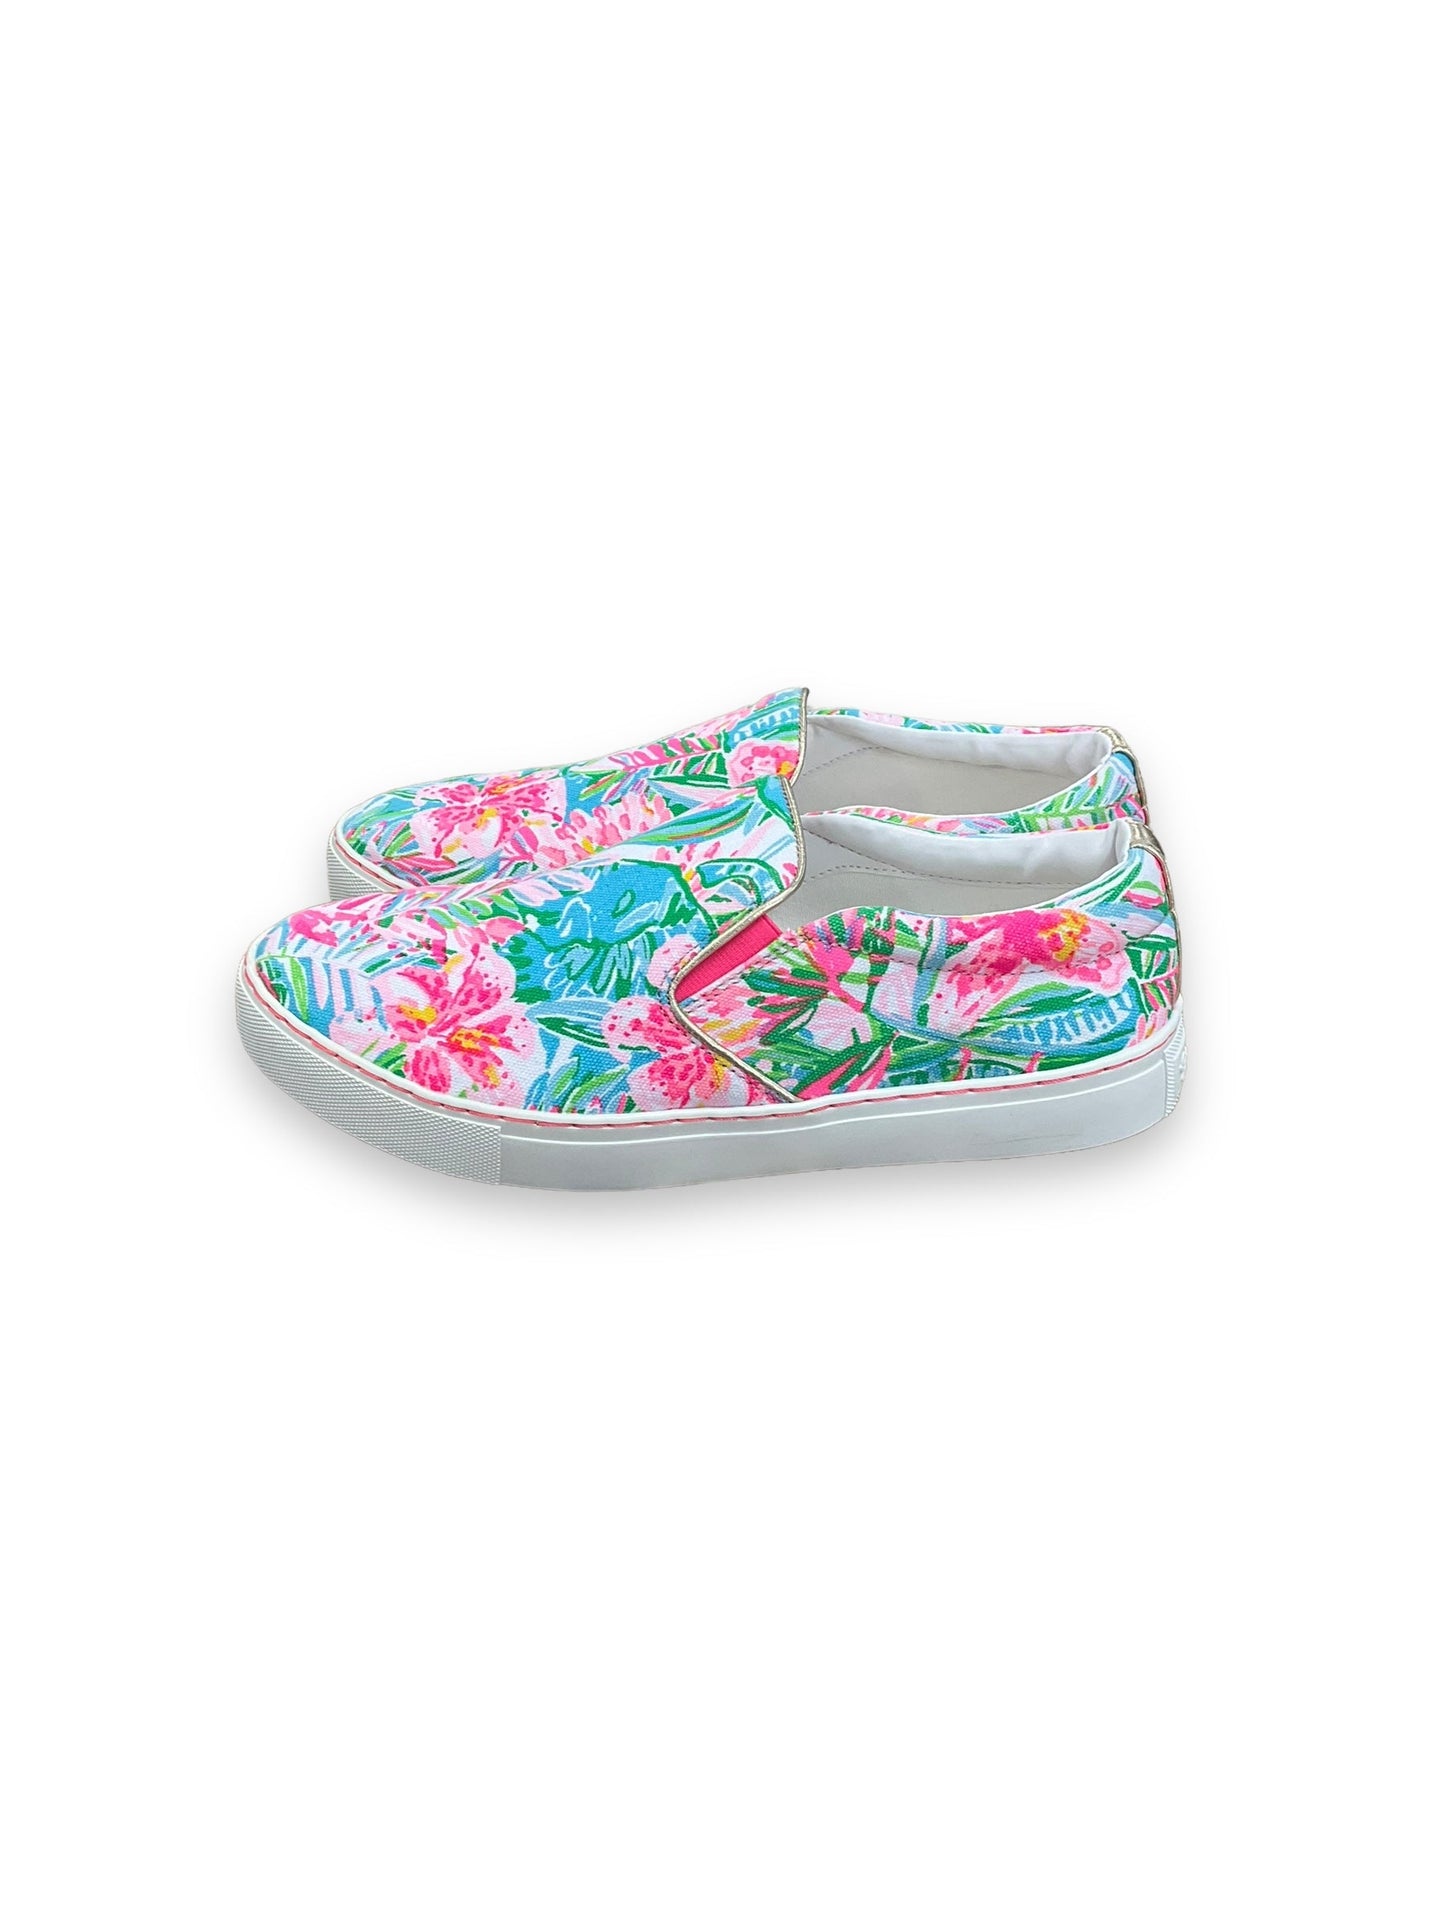 Multi-colored Shoes Flats Lilly Pulitzer, Size 10